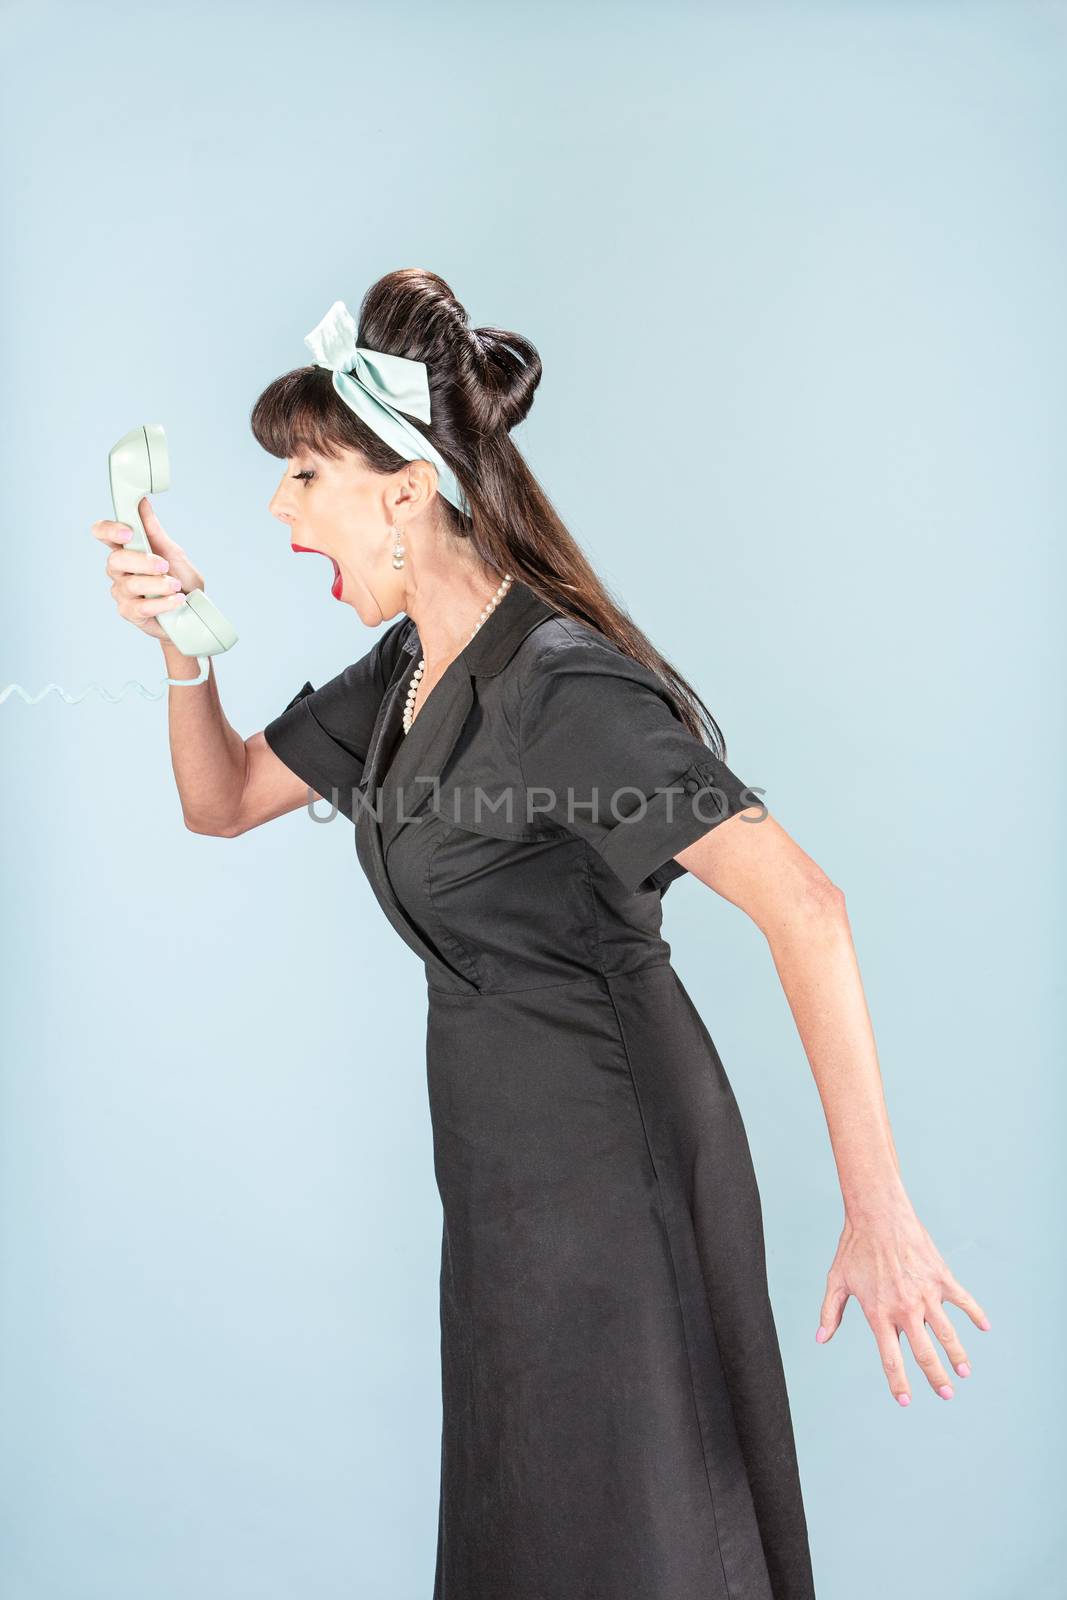 Screaming retro woman in black dress with vintage phone receiver